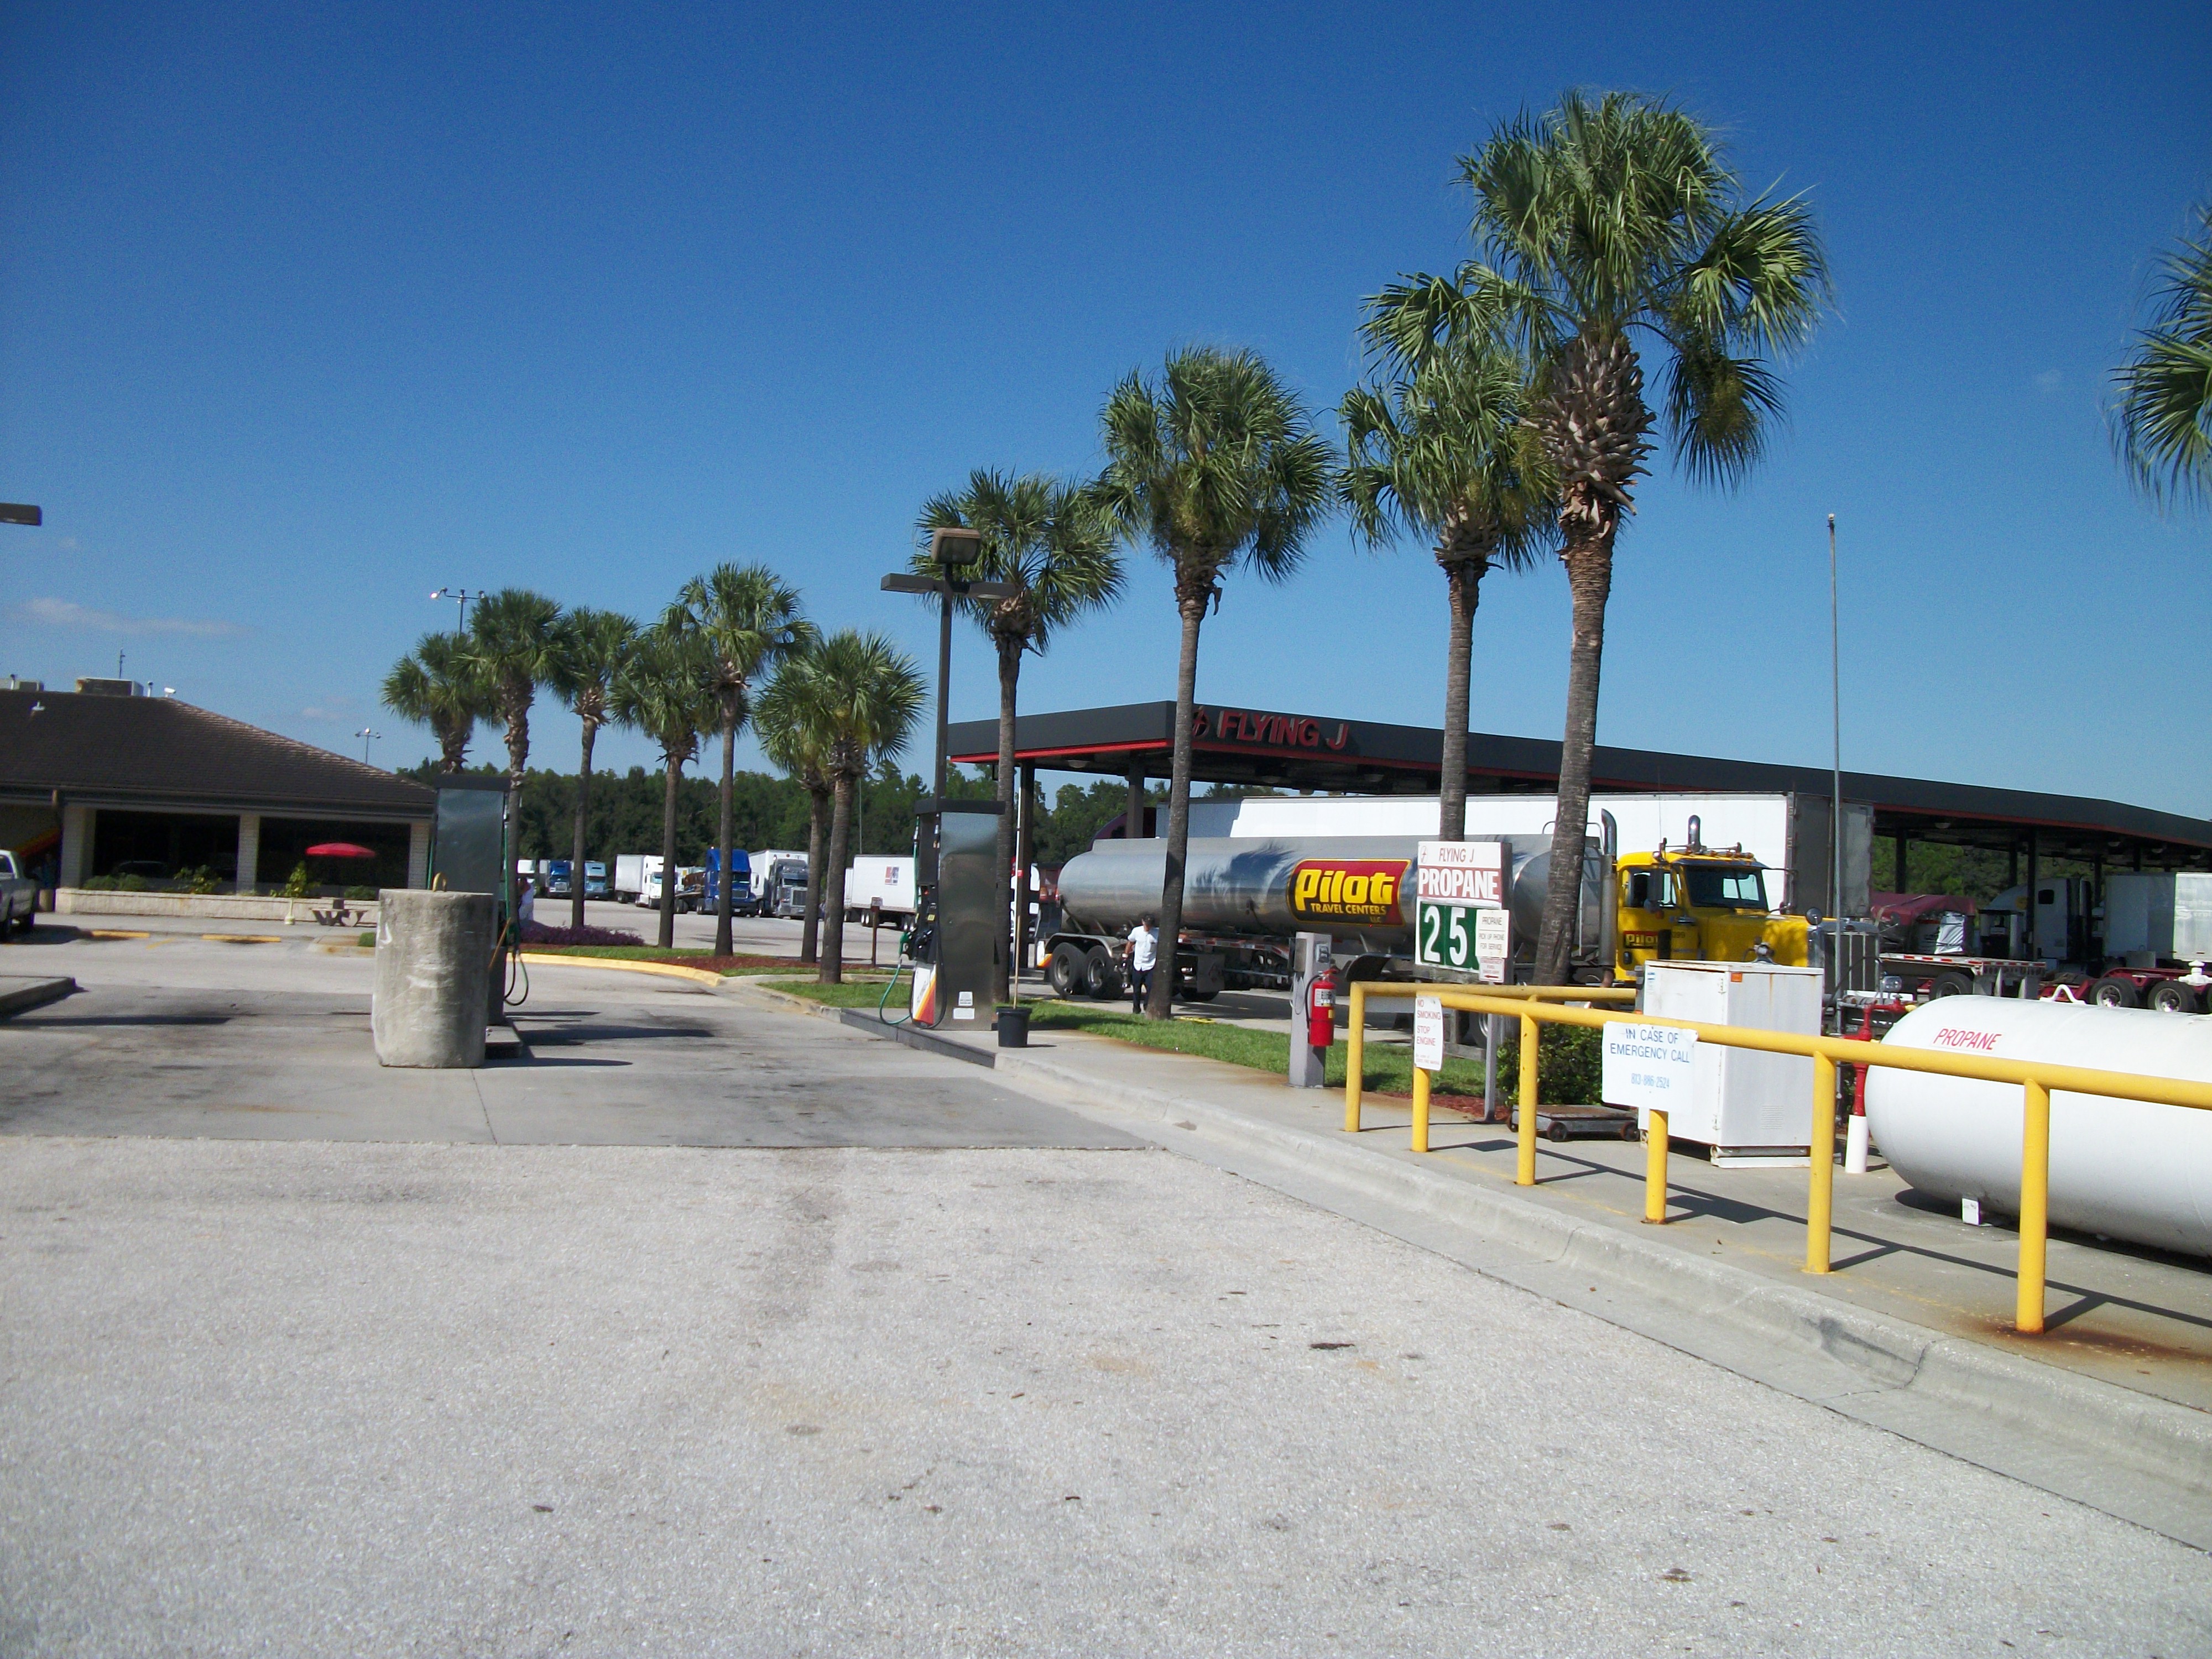 Flying J Pilot Diesel Truck Tanker Propane Refueling Station American Trucking Association (ATA) Applauds DOT for Common Sense Ruling exempting Calif. rest-break rules reports BPN the propane industry's leading source for news and information since 1939.